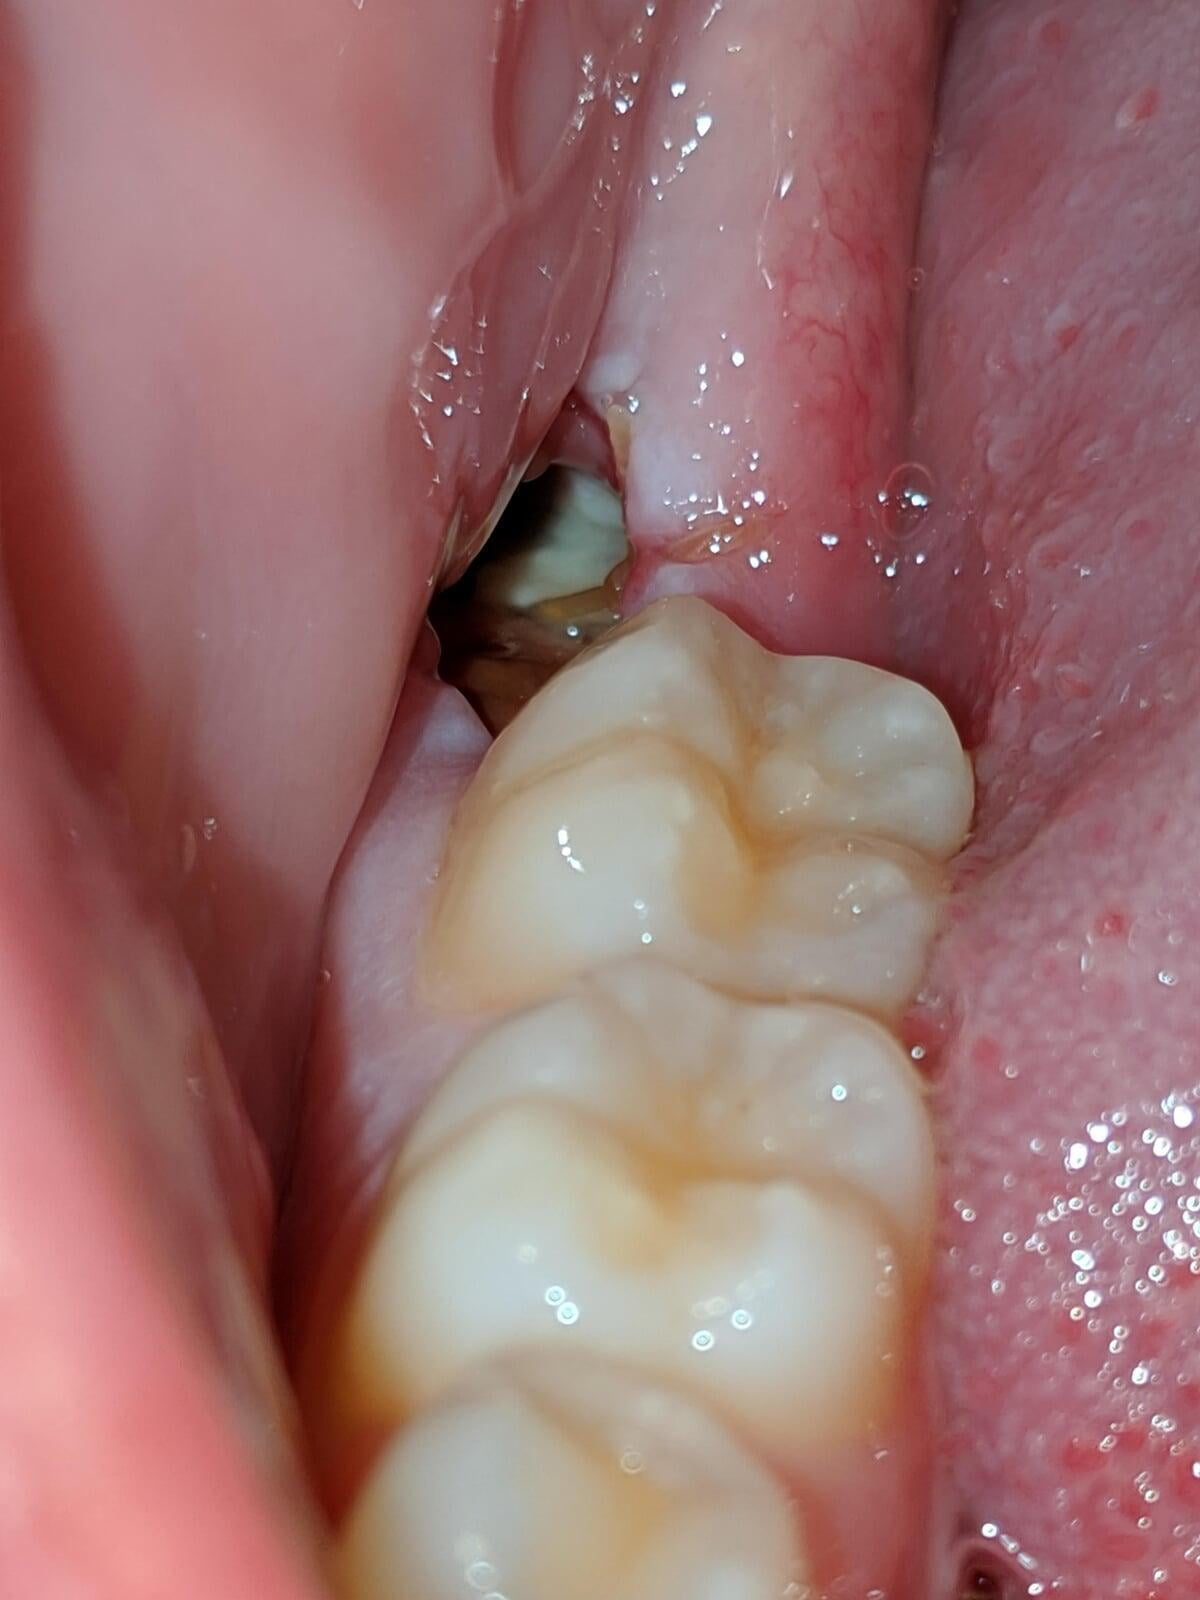 Dry Socket after tooth extraction